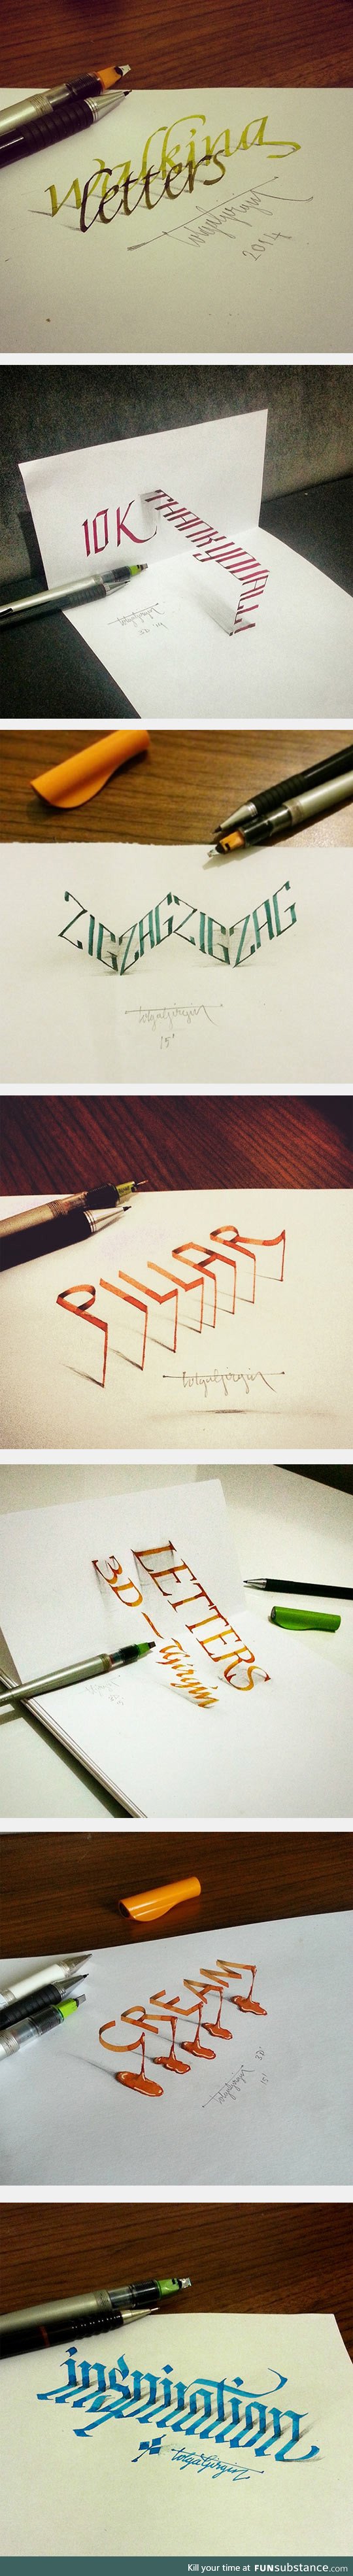 Beautiful examples of anamorphic lettering